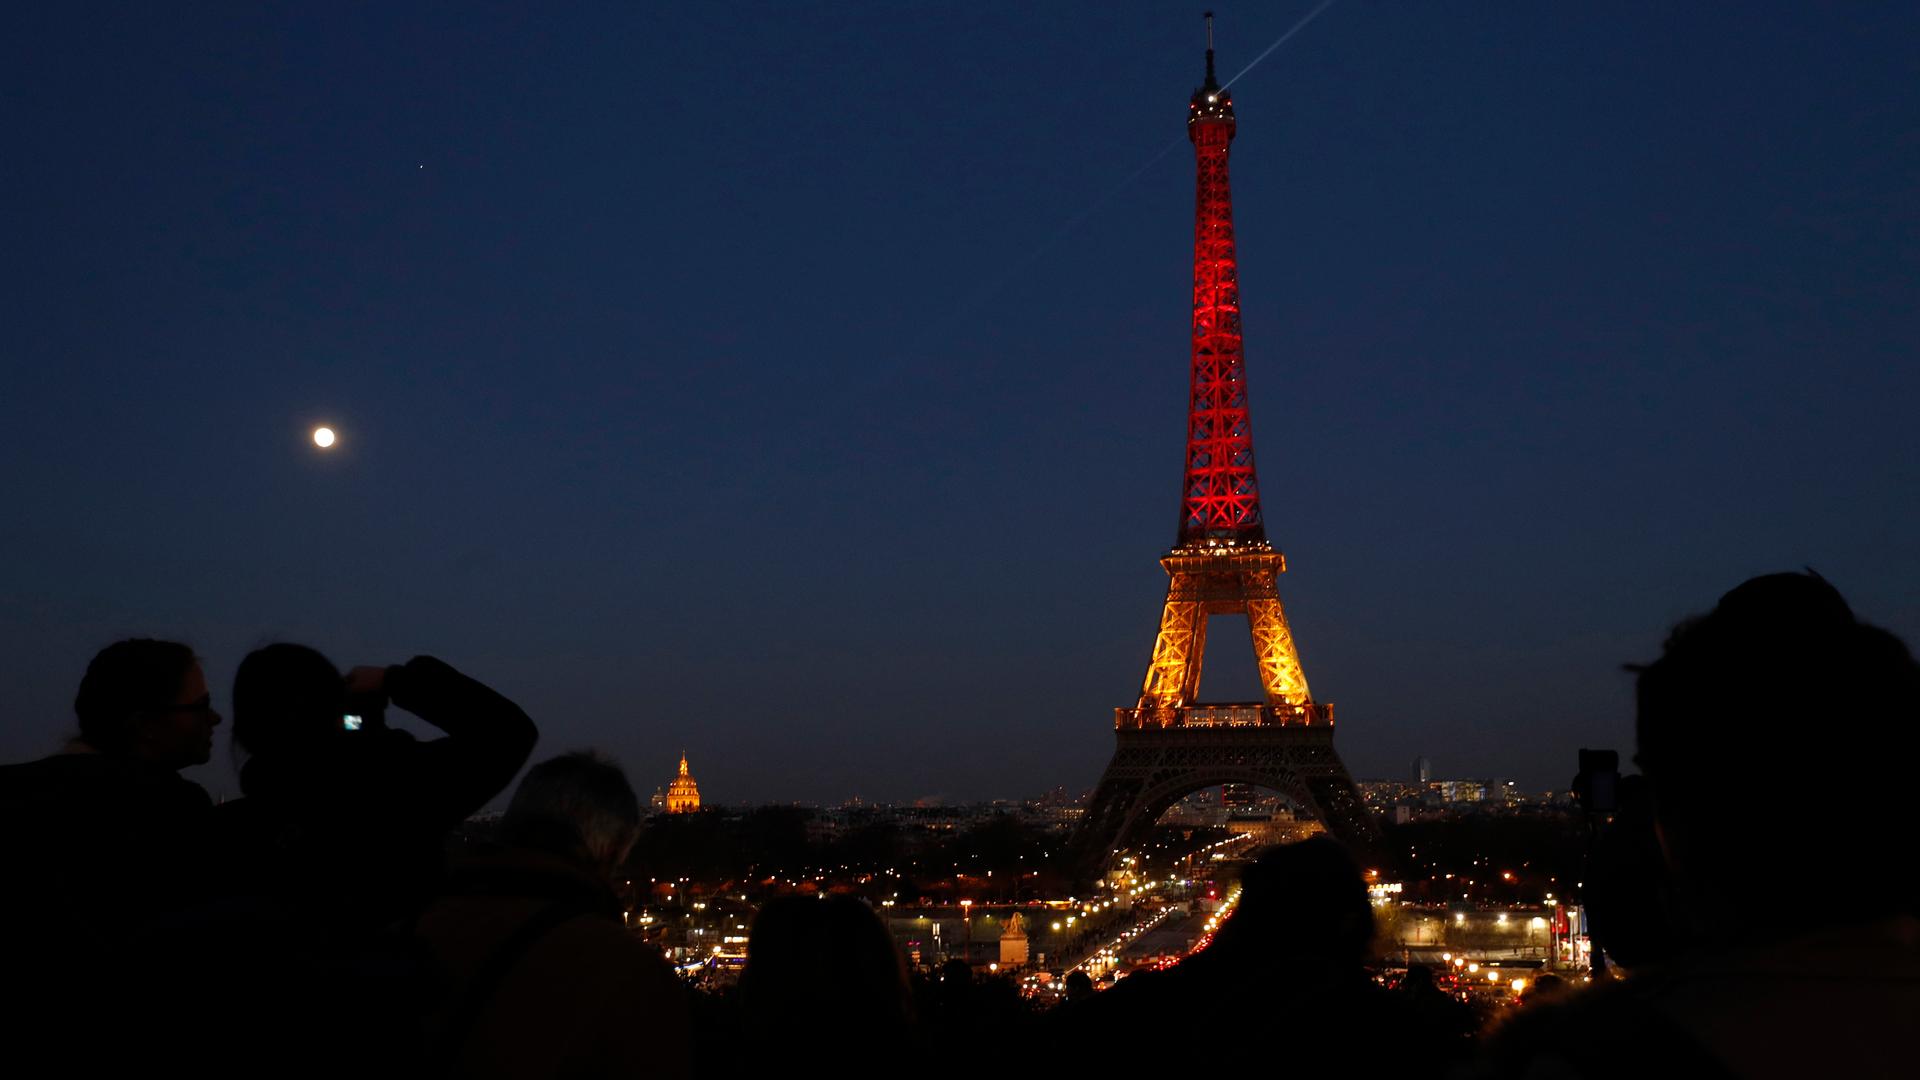 The Eiffel Tower is seen with the black, yellow and red colors of the Belgian flag in tribute to the victims of Tuesday's Brussels bomb attacks, in Paris, France, March 22, 2016.